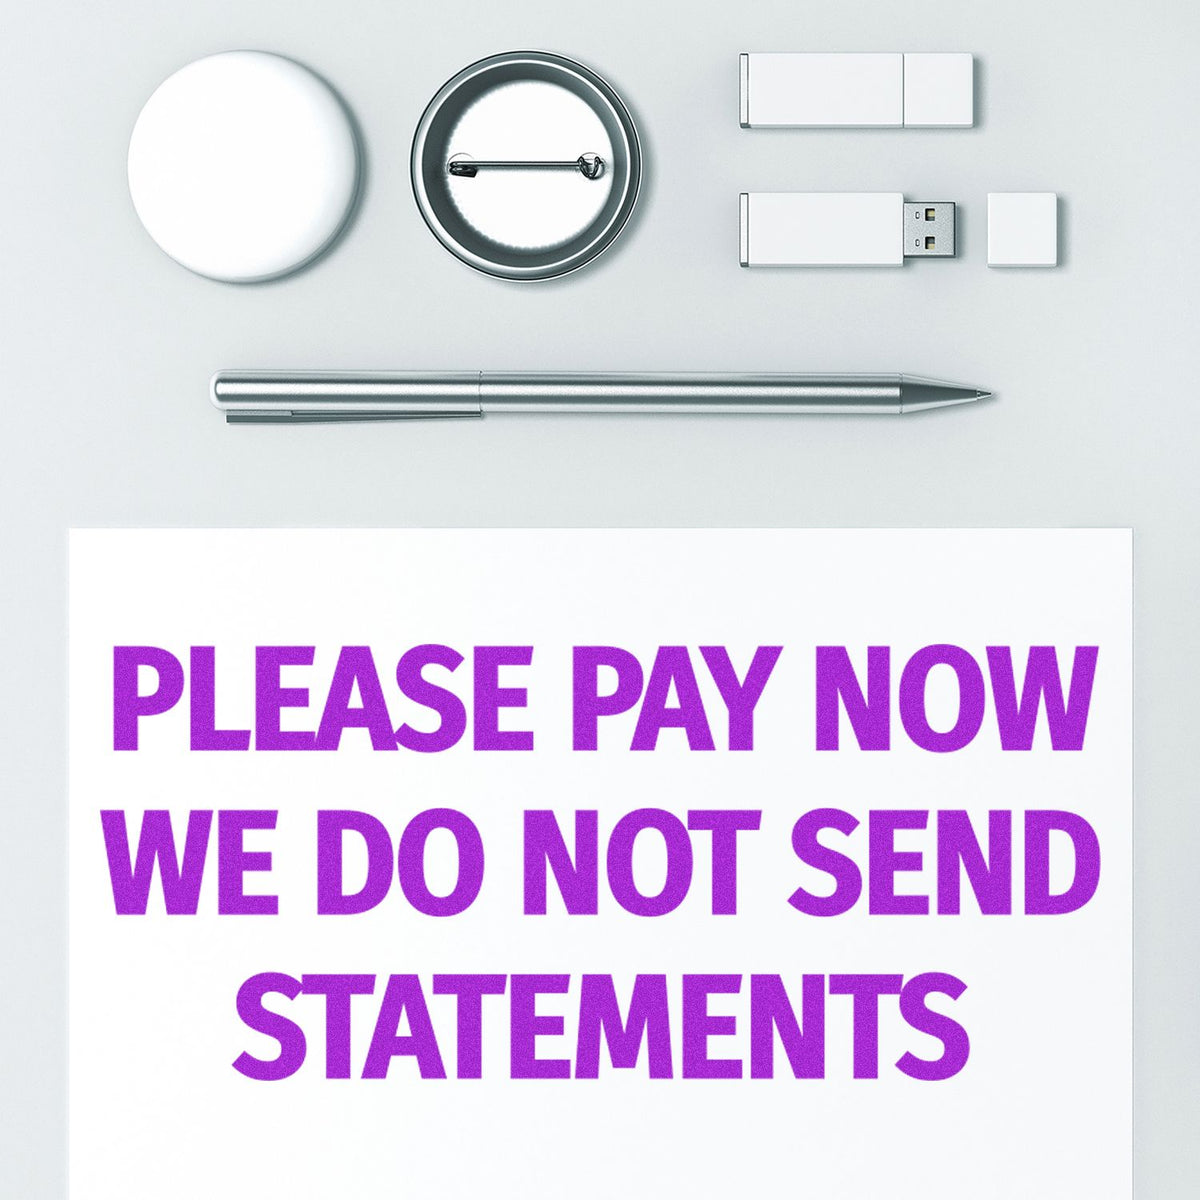 Please Pay Now No Statements will be Sent Rubber Stamp In Use